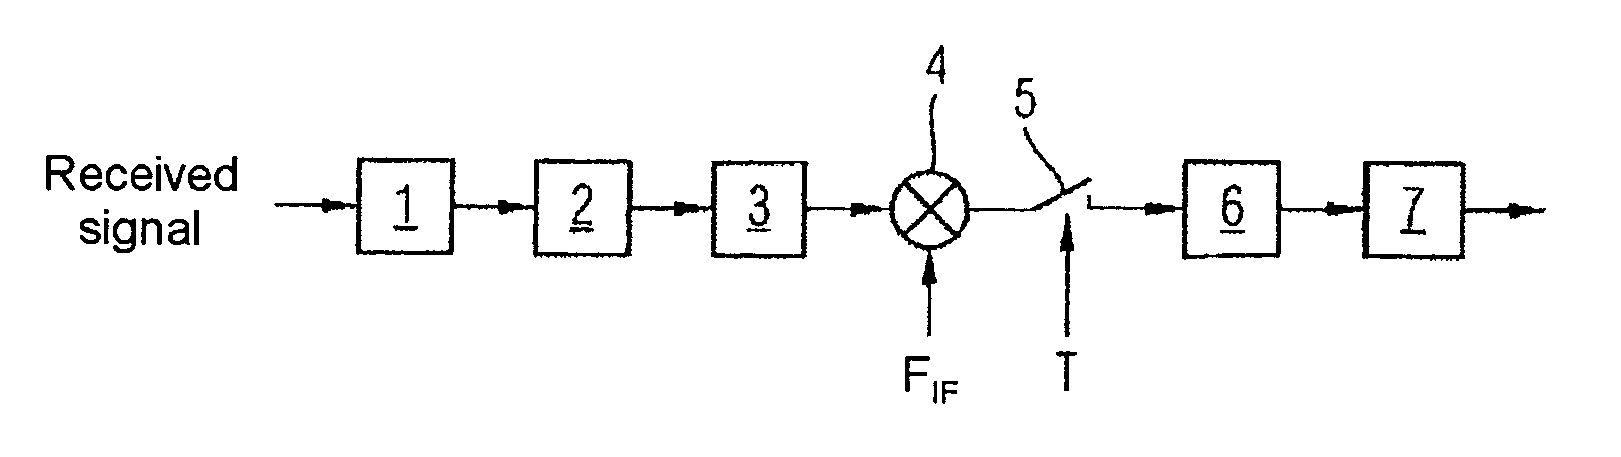 Receiver for a wire-free communication system